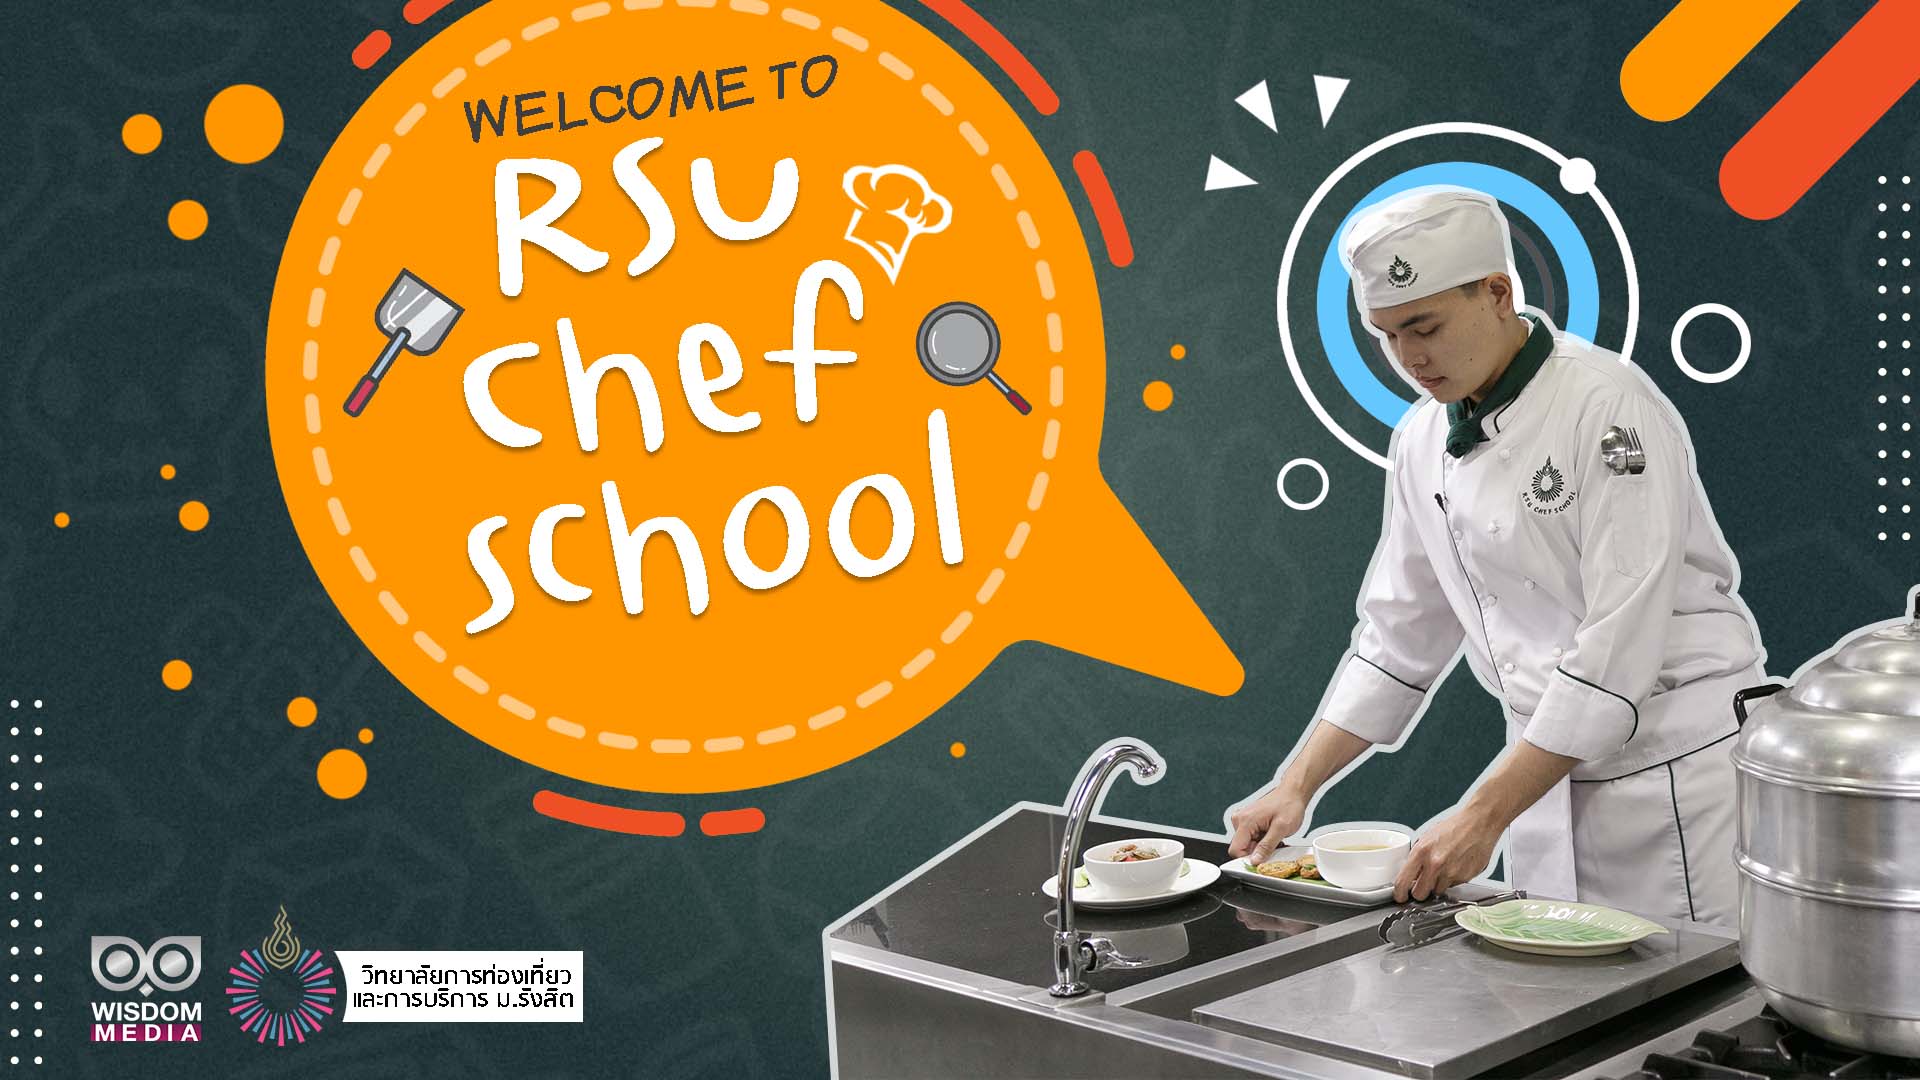 WELCOME TO RSU CHEF SCHOOL